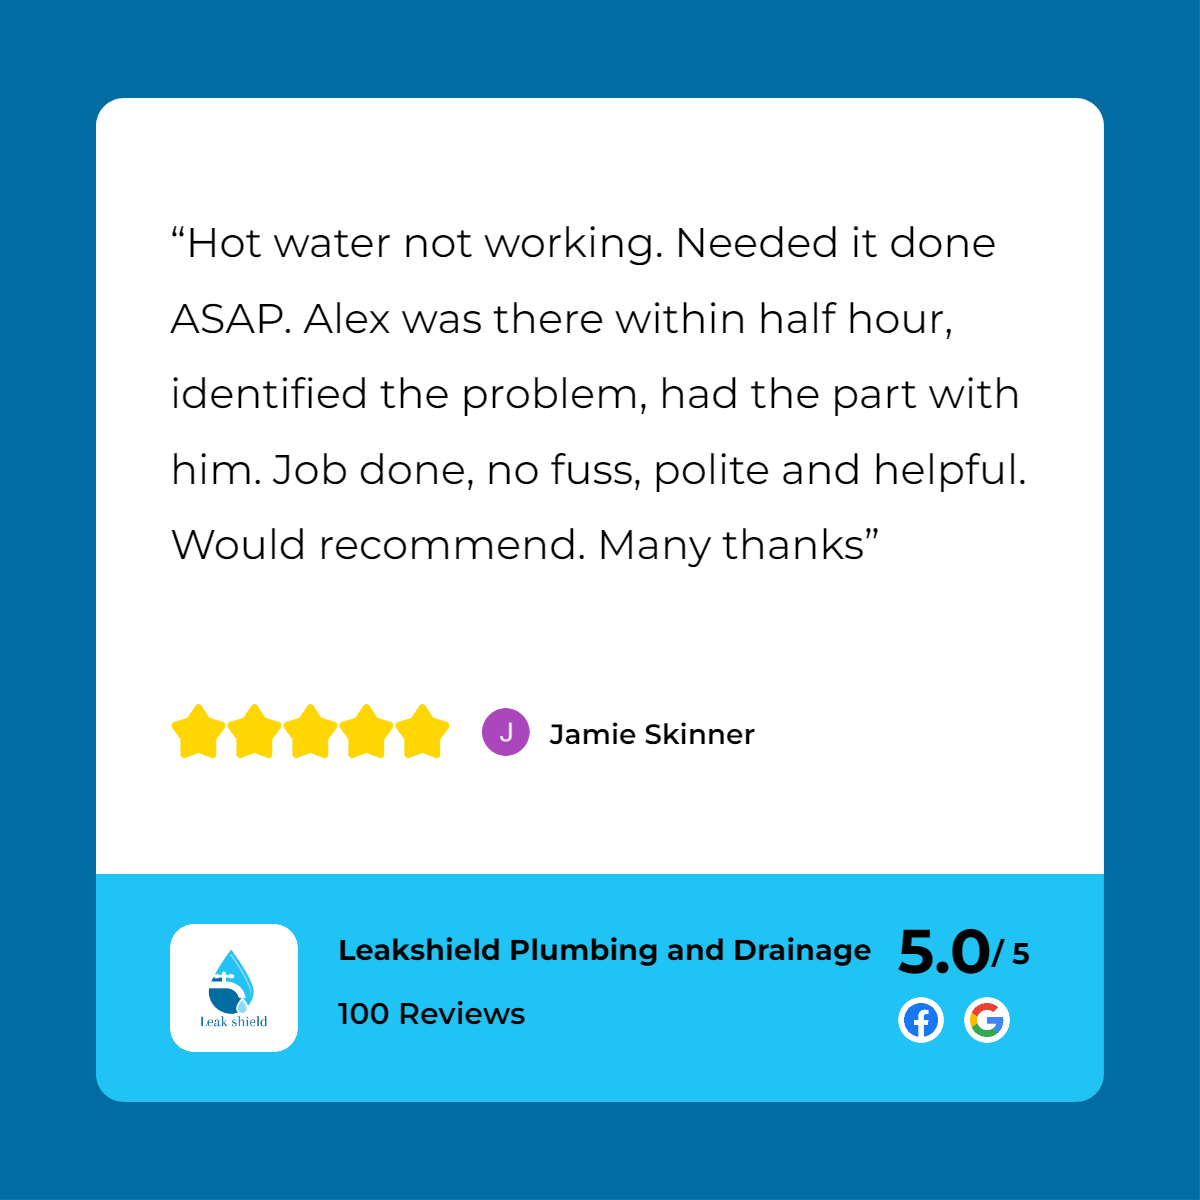 A customer review of a plumber with a star rating.